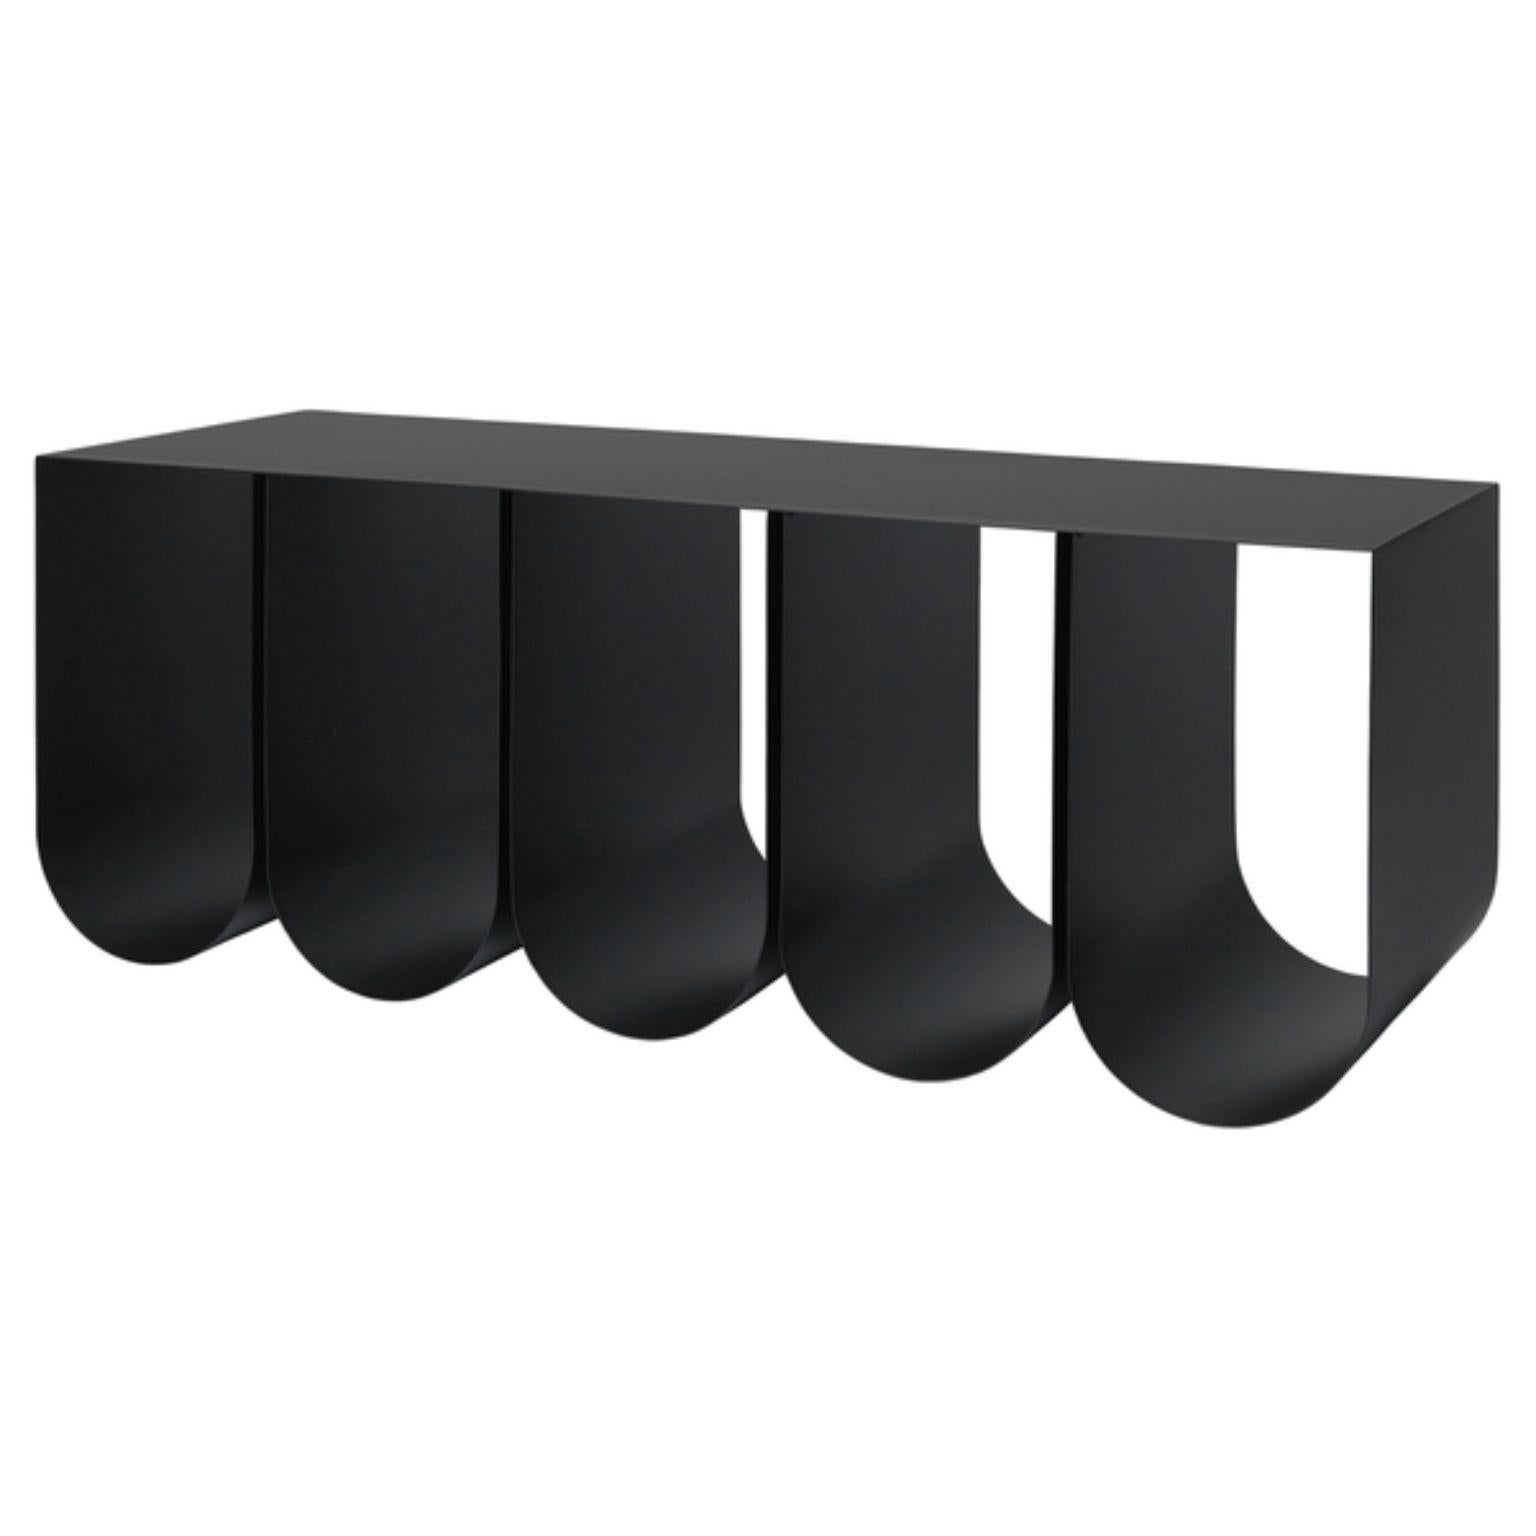 Black steel curved bench by Kristina Dam Studio
Materials: Black powder-coated steel
Dimensions: D 40 x W 110 x H 42 cm
35 kg

Kristina Dam graduated from The Royal Danish School of Fine Arts, Architecture and Design in Copenhagen. In her